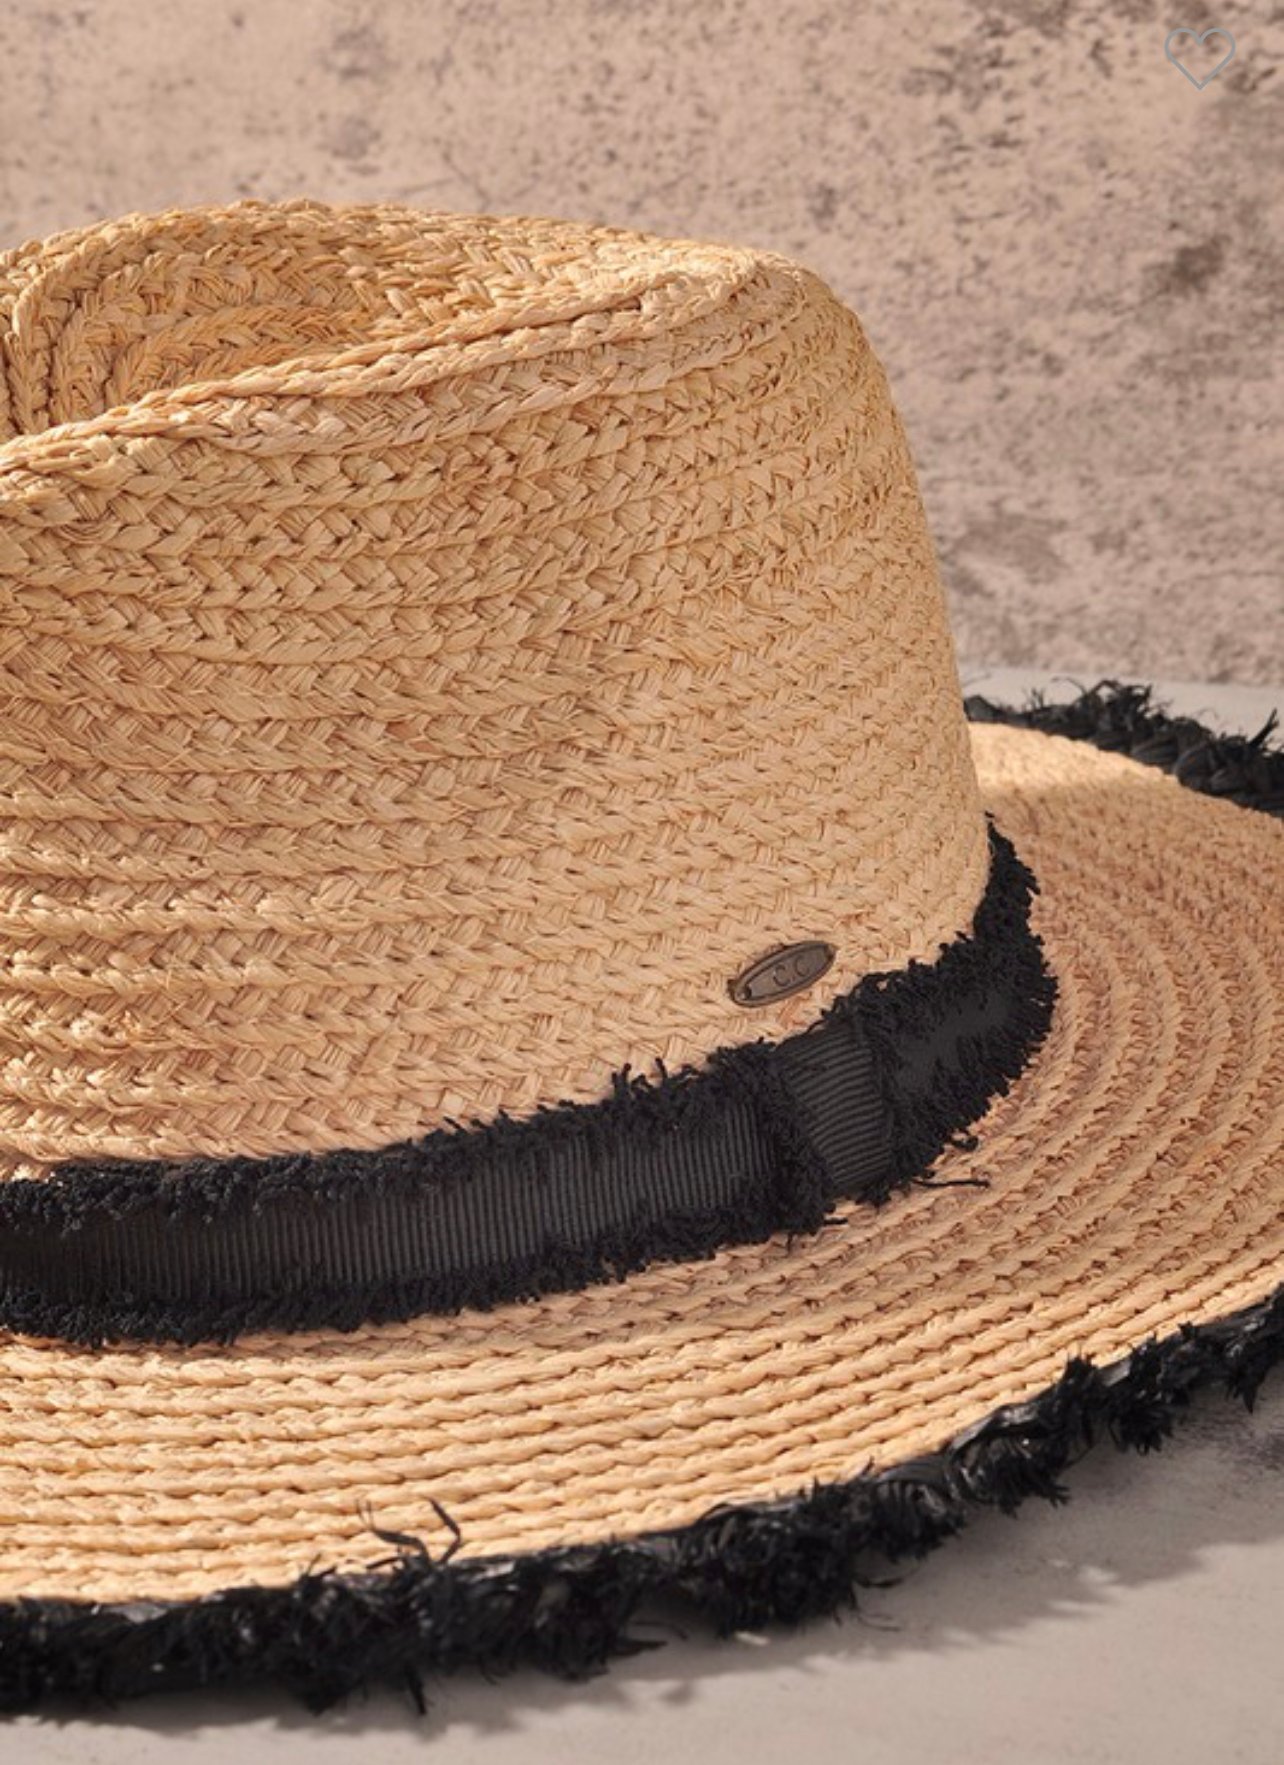 Image of Band Straw Hat 